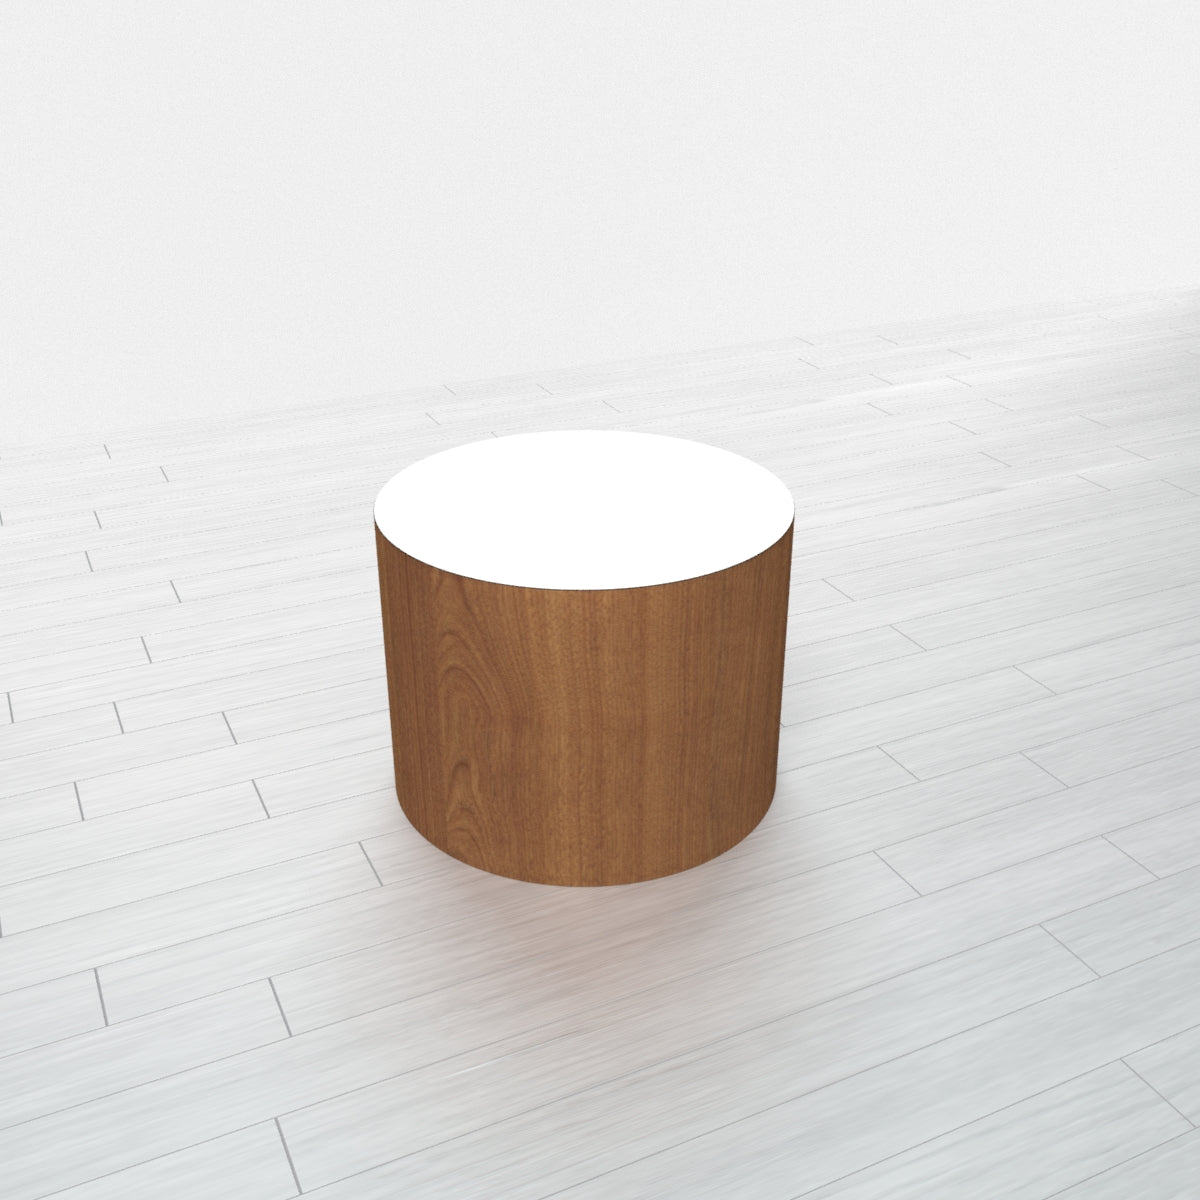 CYLINDRICAL - Cognac Maple Base + White Top - 15x15